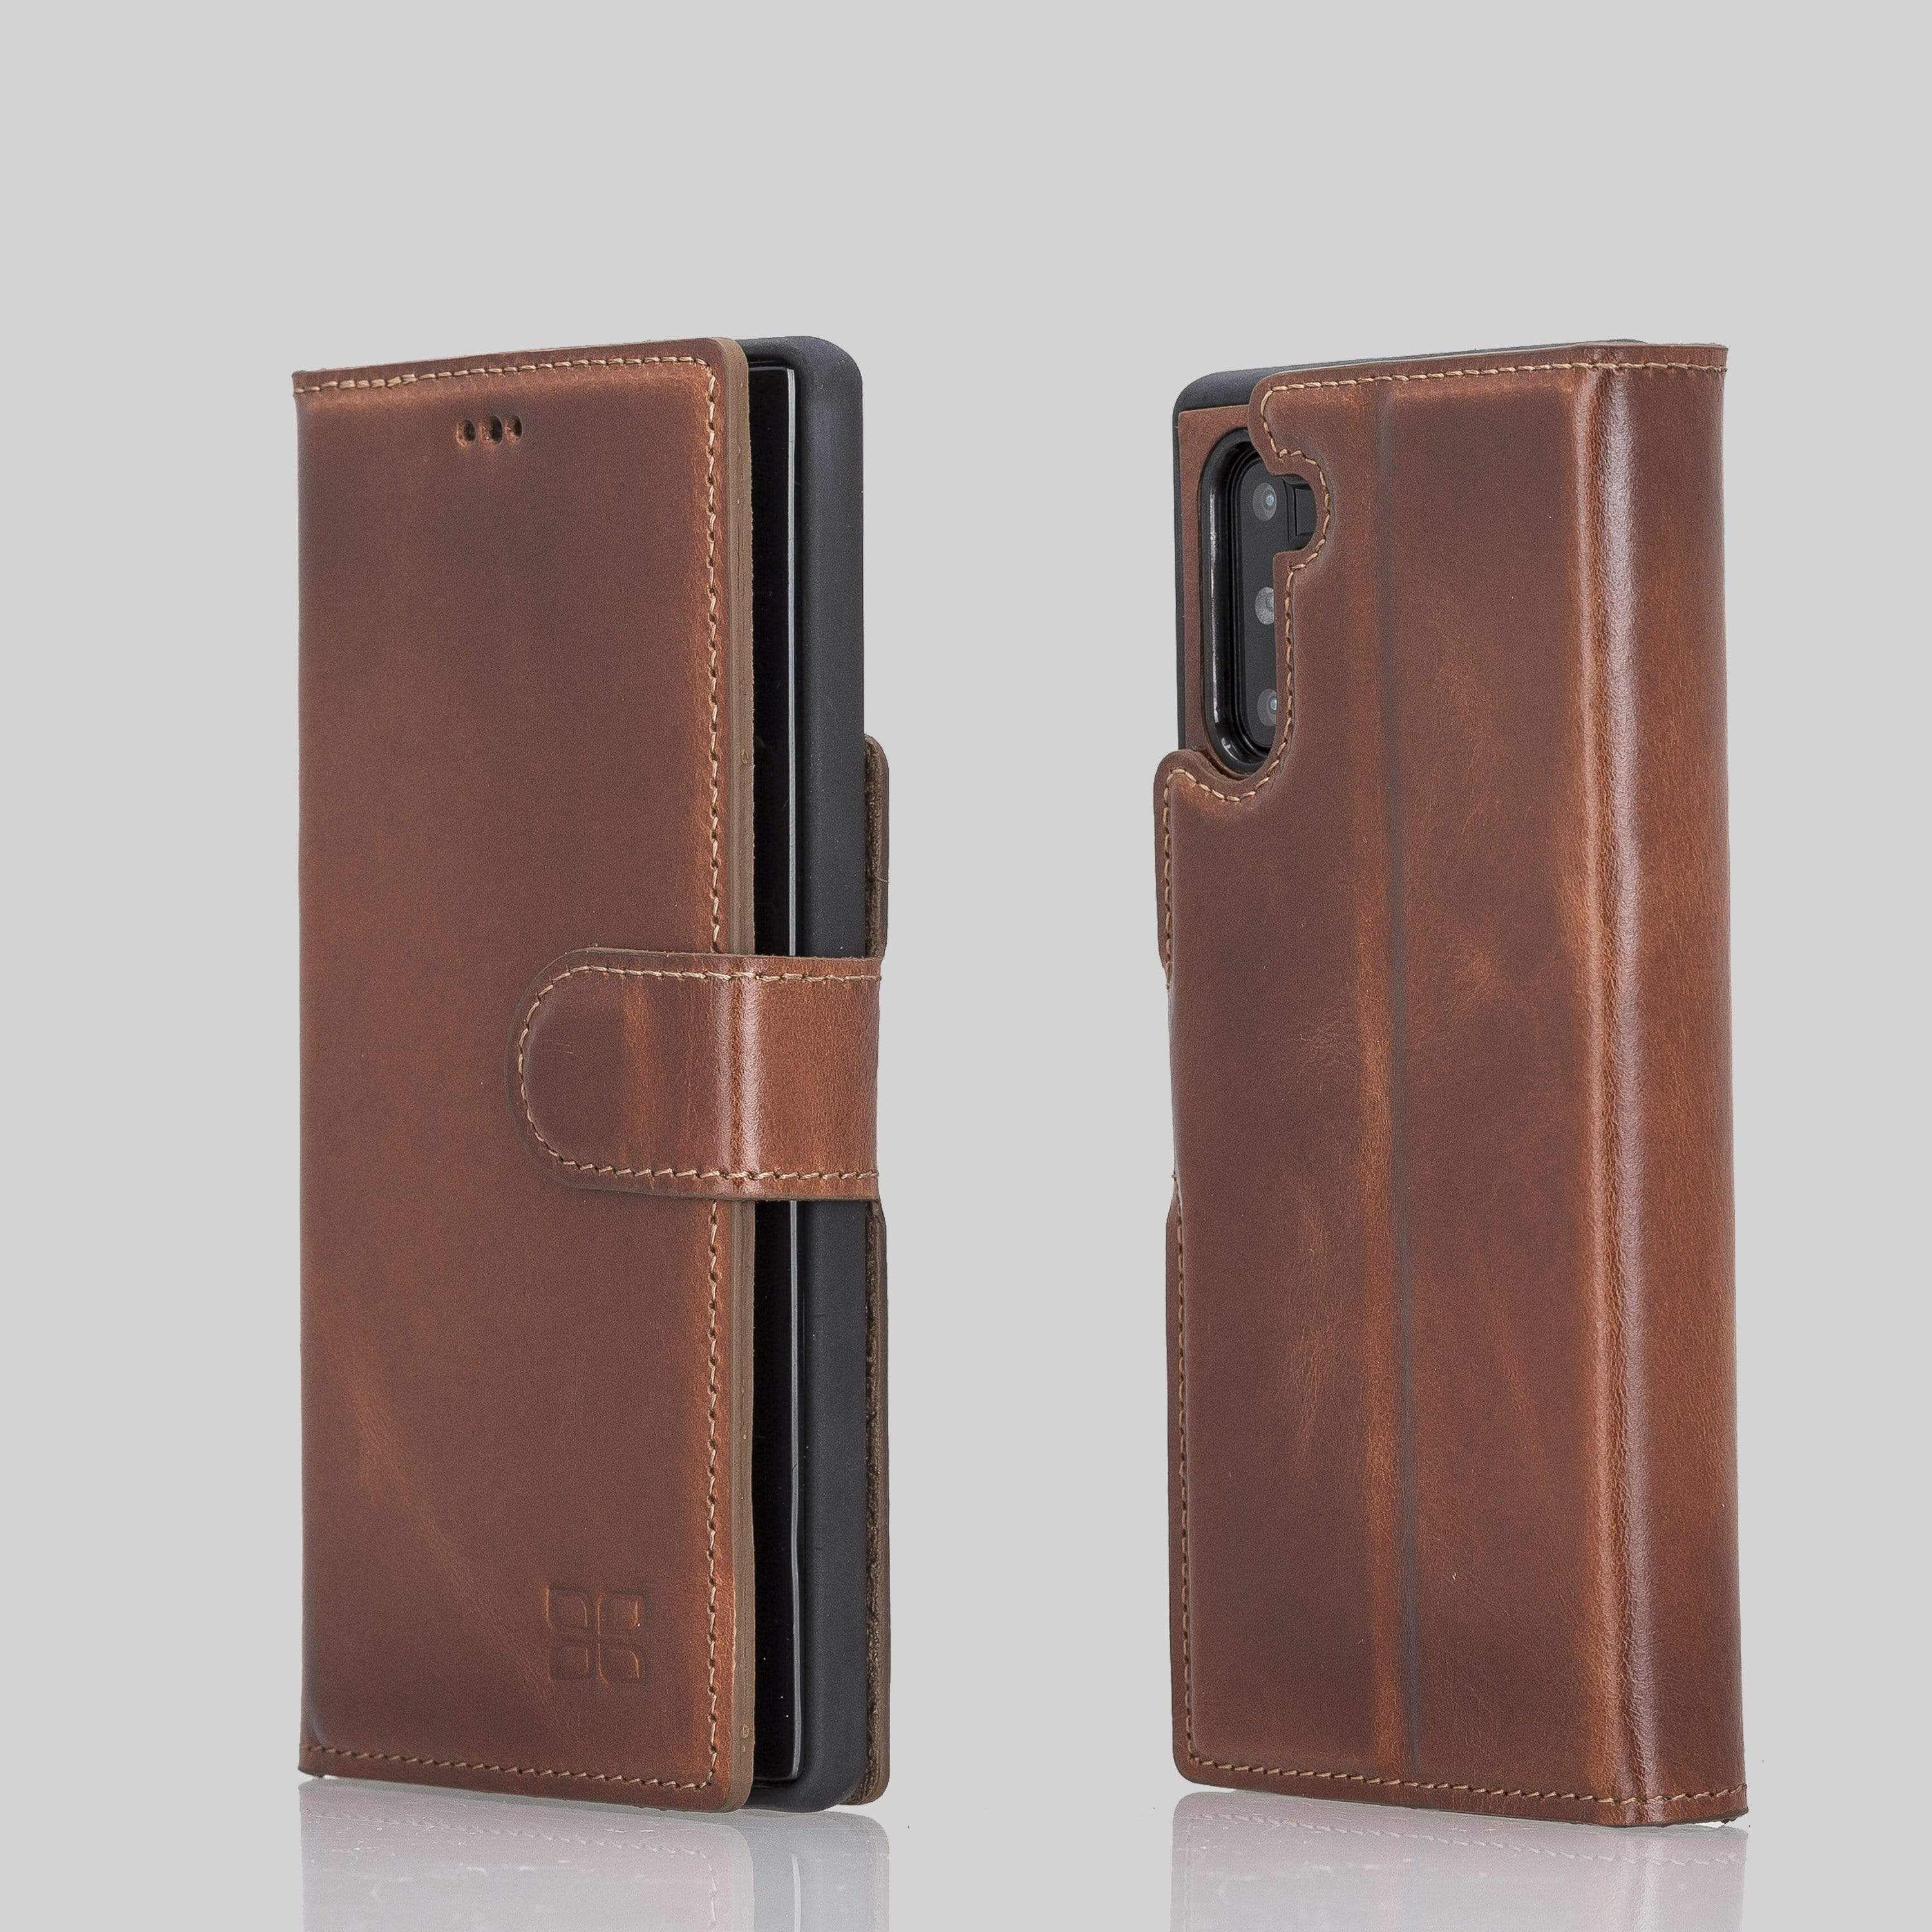 Phone Case Magnetic Detachable Leather Wallet Case for Samsung Note 10 - Antic Brown Bouletta Shop